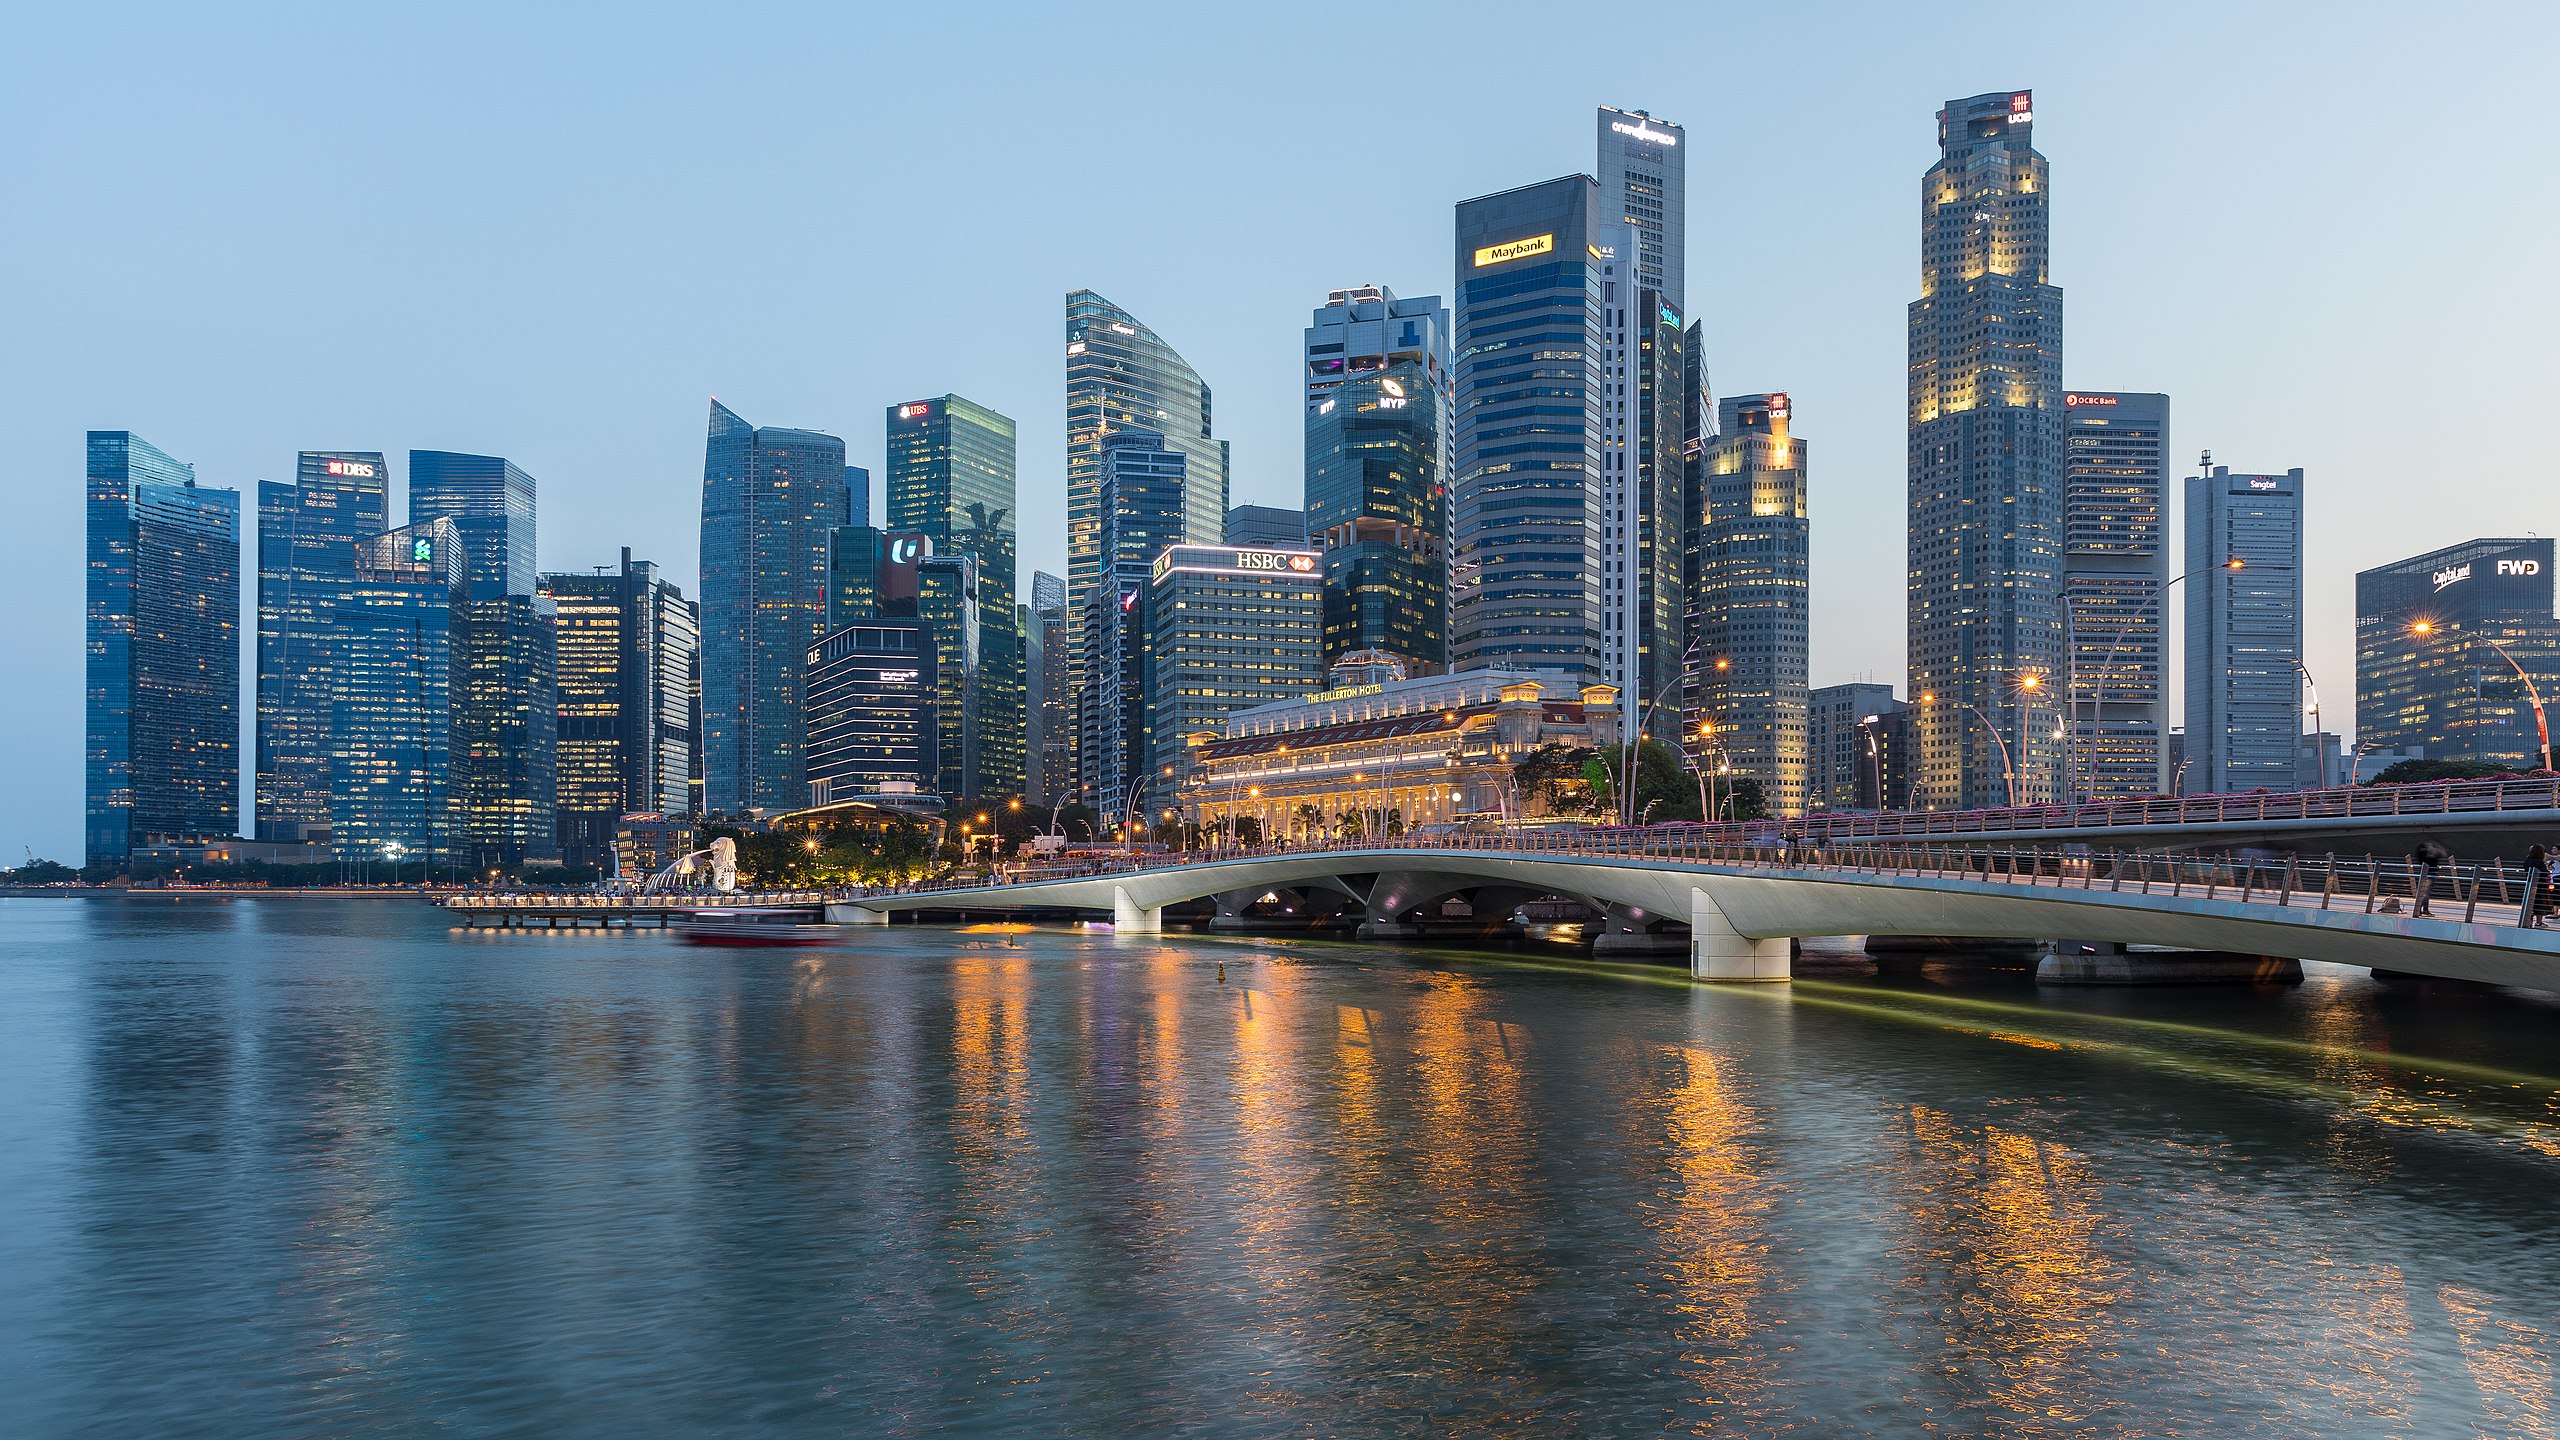 Skyline_of_the_Central_Business_District_of_Singapore_with_Esplanade_Bridge_in_the_evening